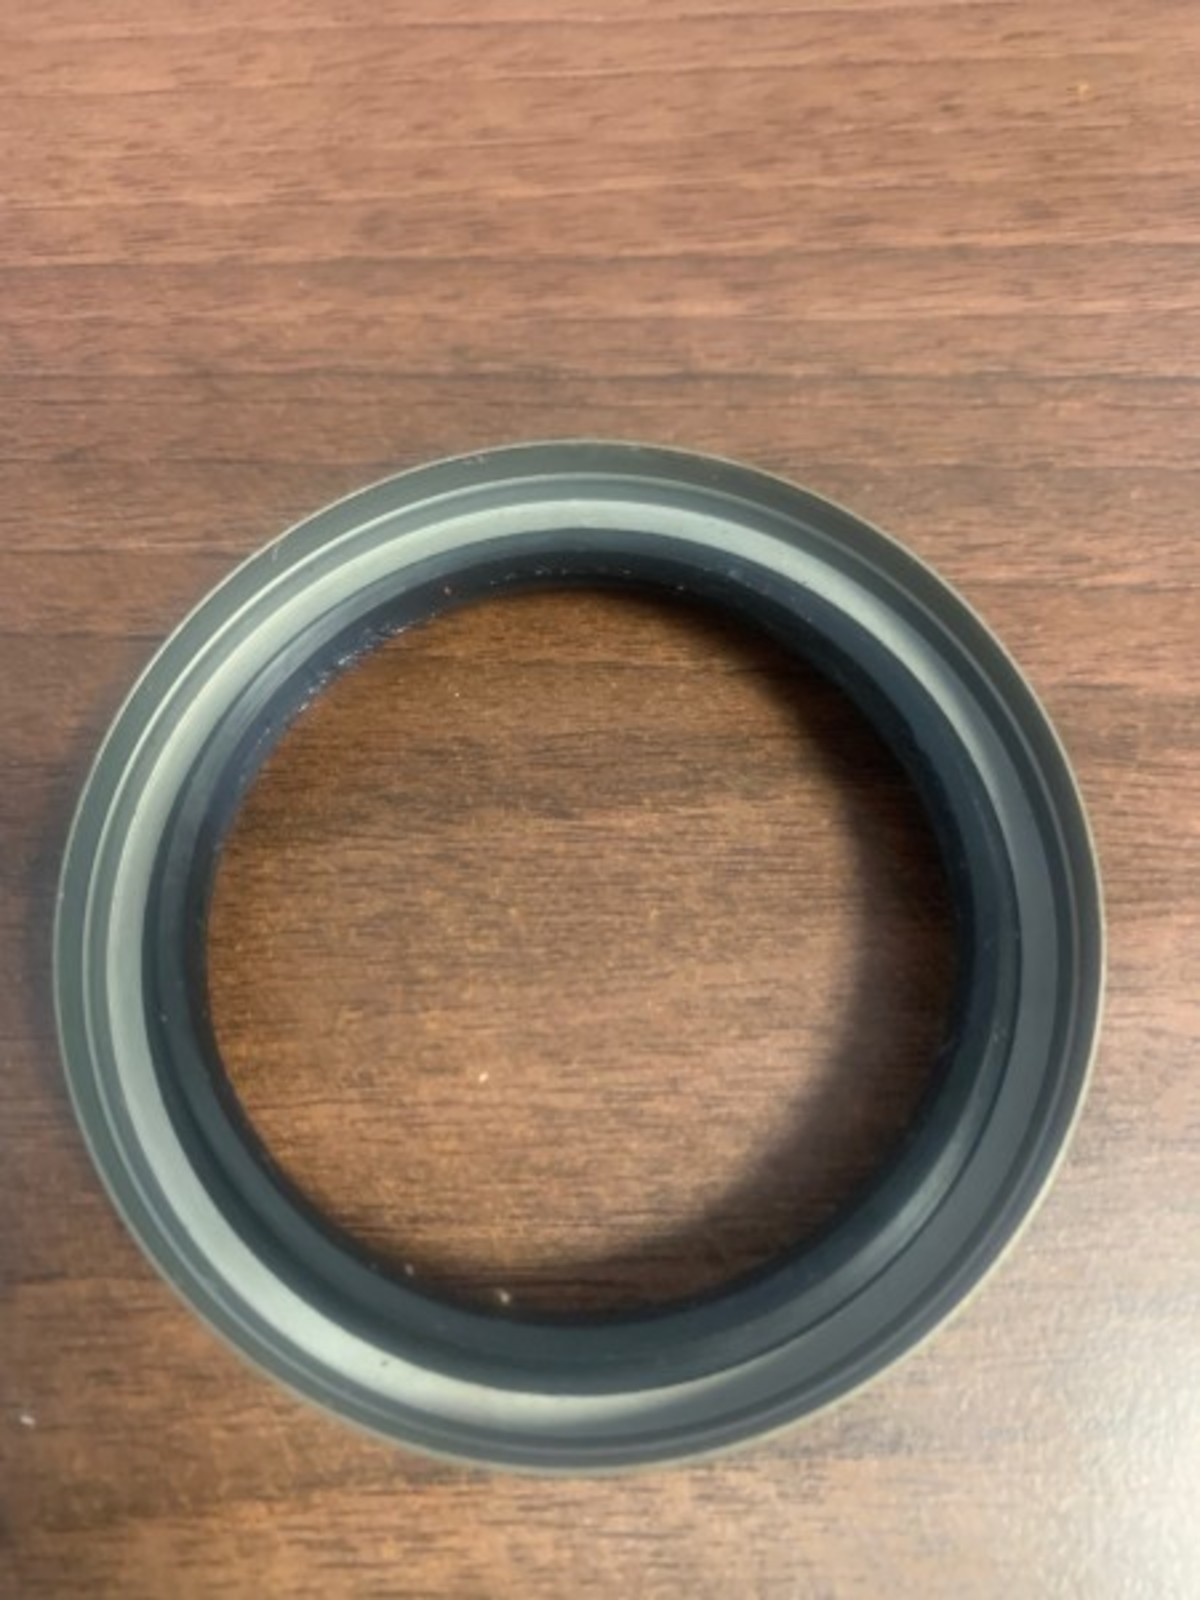 11-18 Extension Seal